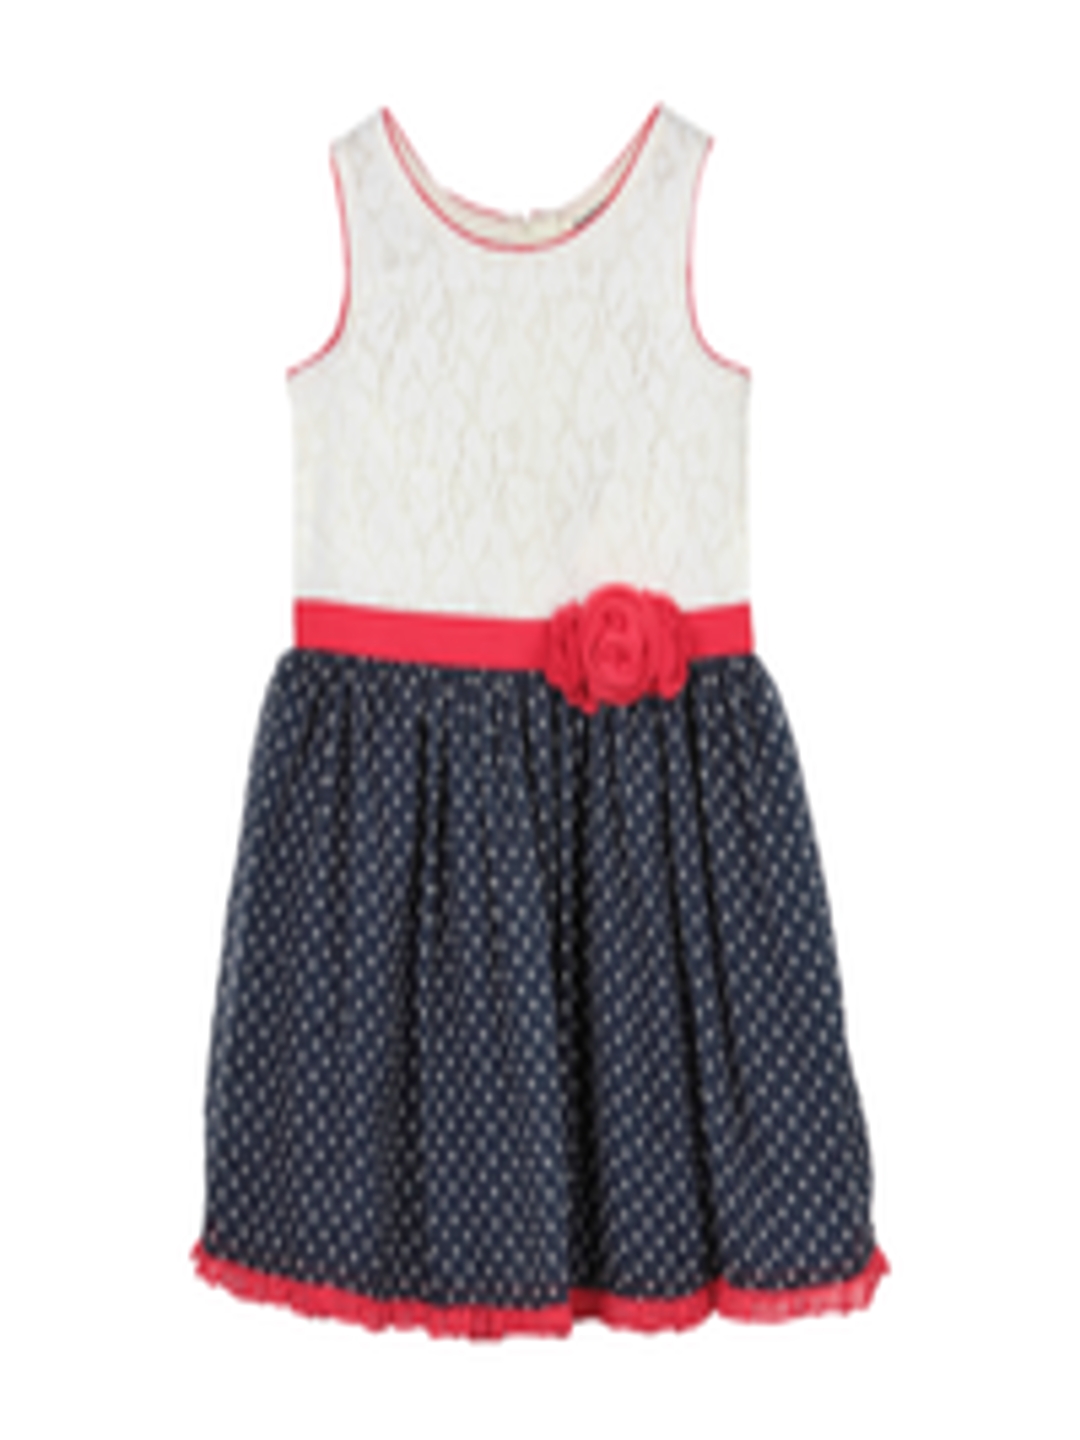 Buy Beebay Girls White & Navy Printed Fit & Flare Dress - Dresses for